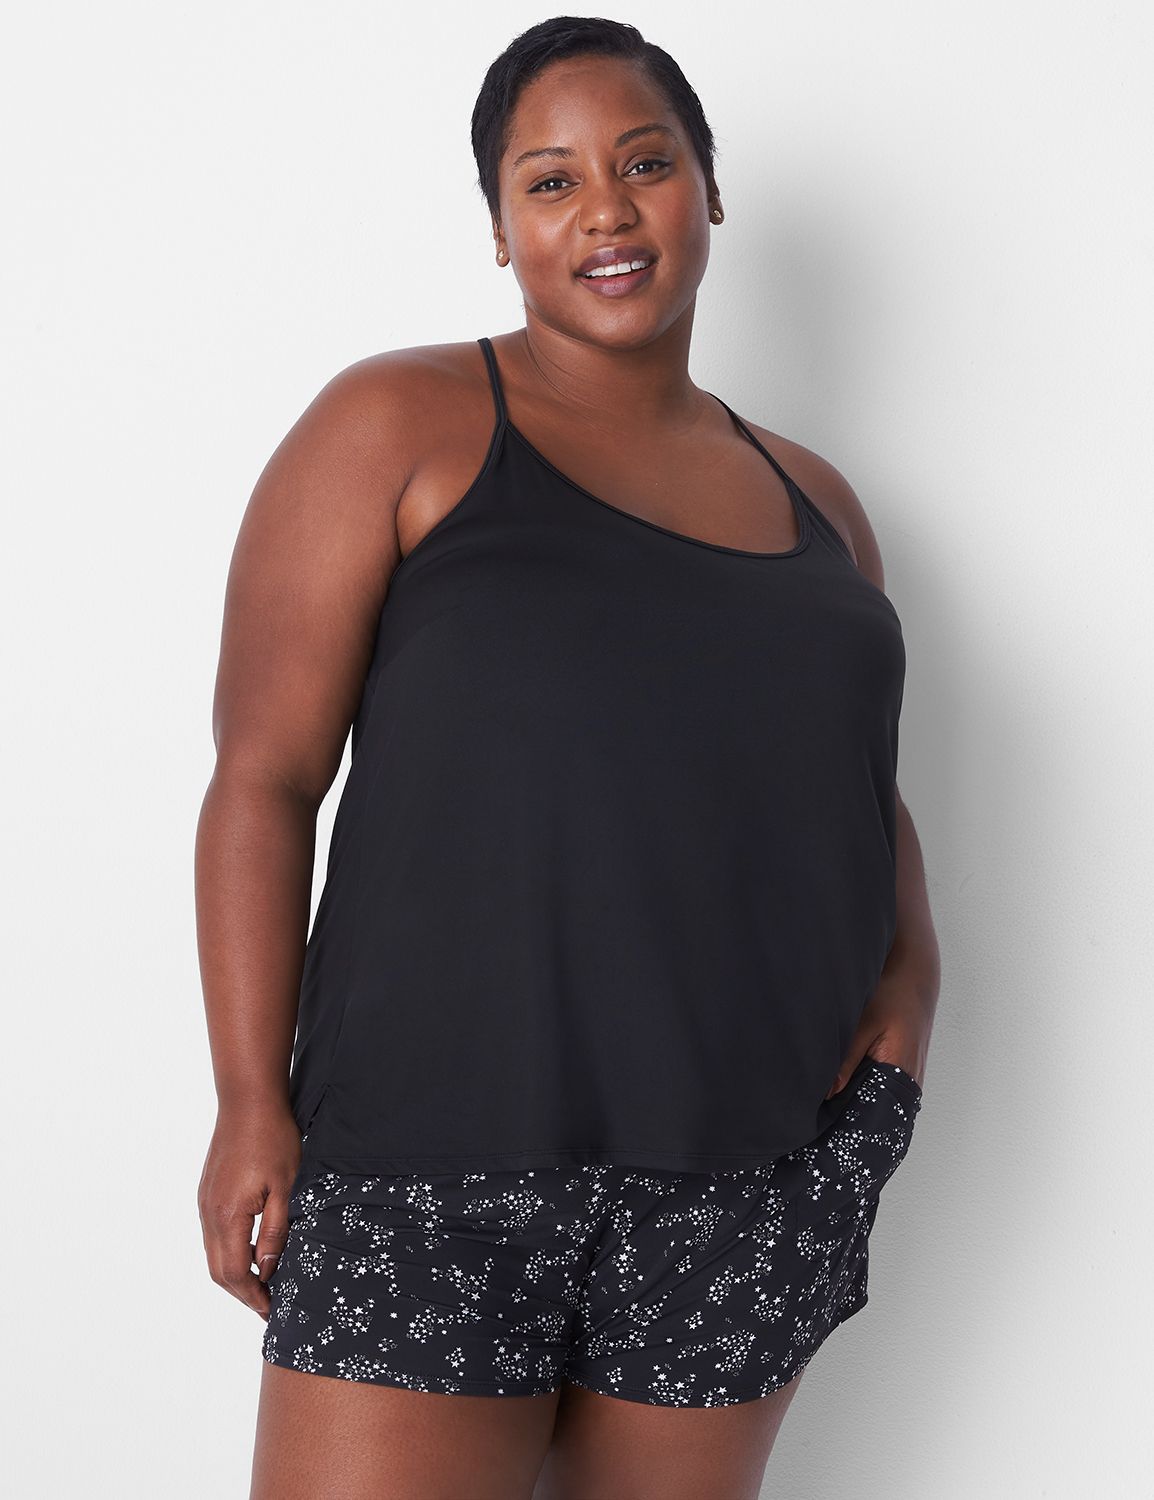 Lane Bryant - It's a sale BRA-nanza! Shop B2G2 free select bras and BOGO  50% off all other bras. #Cacique Shop